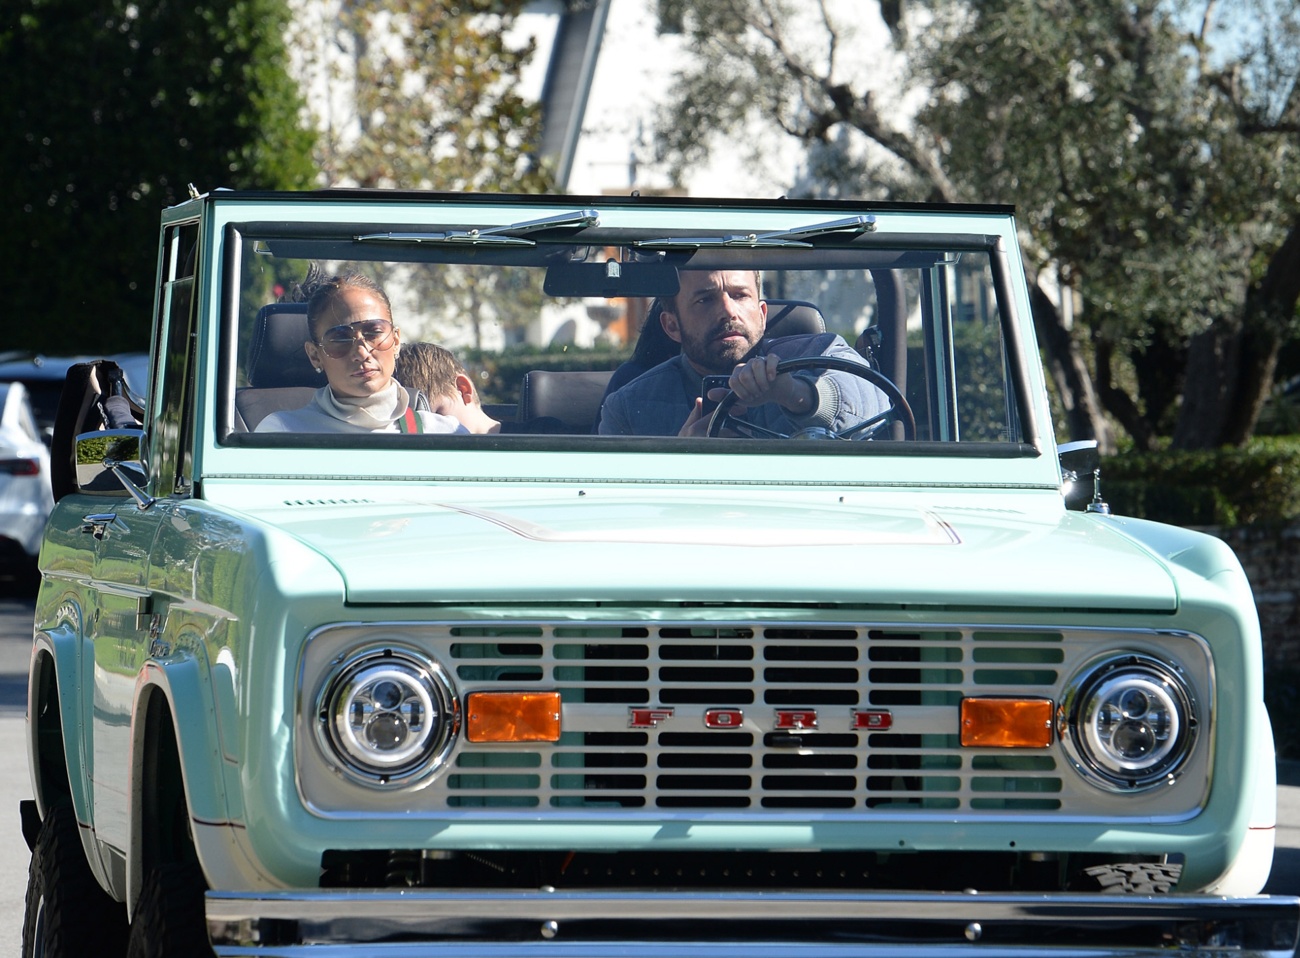 Ben Affleck and Jennifer Lopez ride their love through the streets of Los Angeles in a spectacular blue Bronco